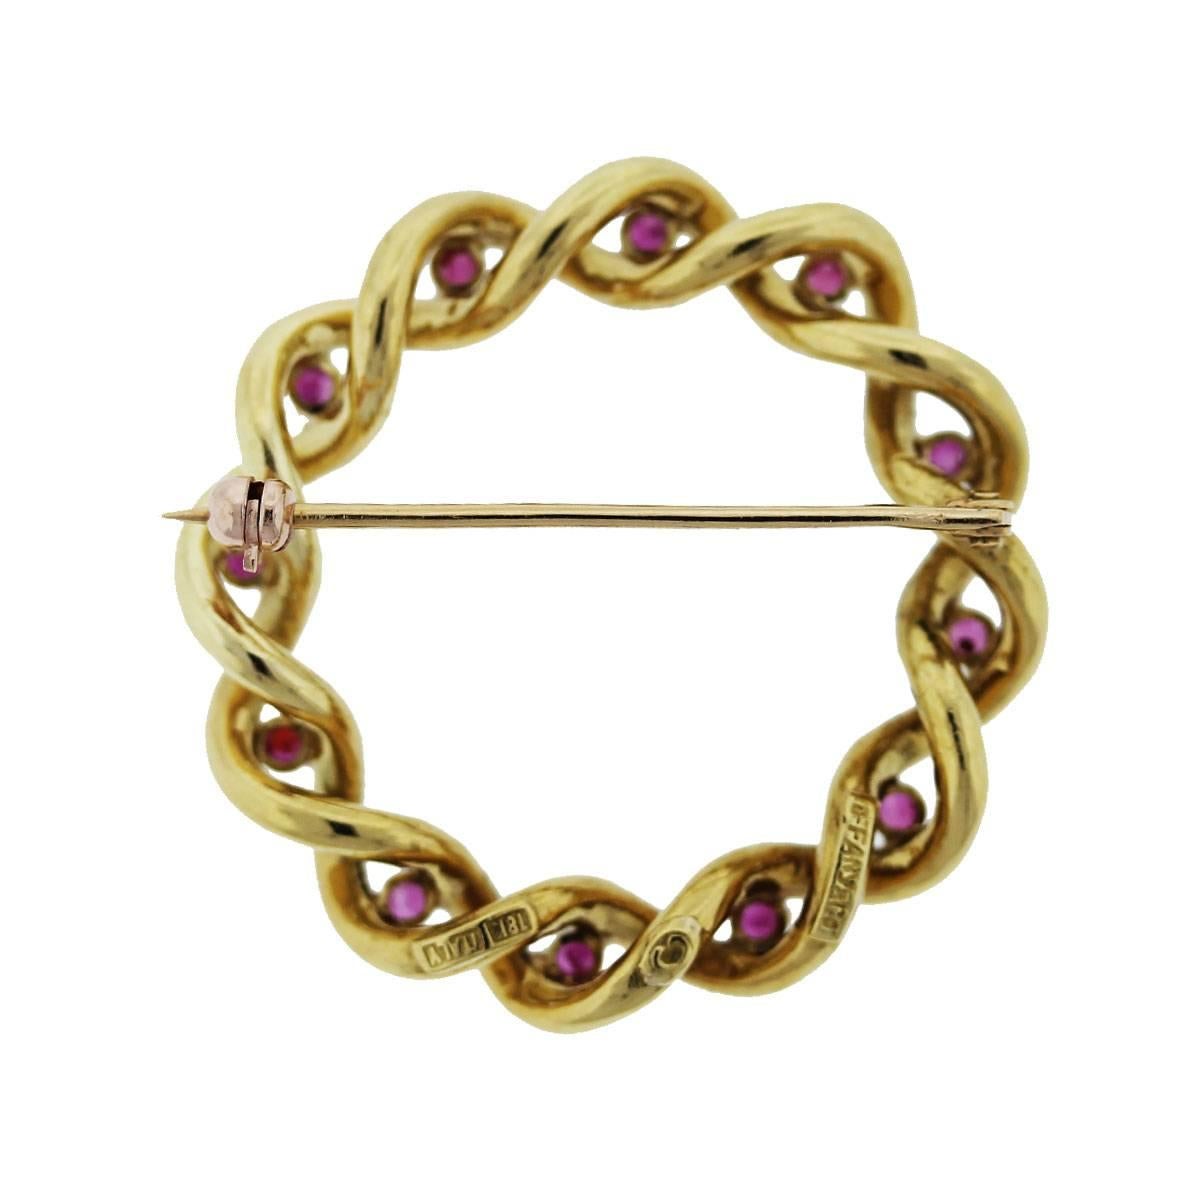 Style: Tiffany & Co. 18k Yellow Gold Ruby Wreath Pin
Material: 18K Yellow Gold
Gemstones: 12 Round Ruby Gemstones
Measurements: 1.25''
Total Weight: 7g (4.5dwt)
Additional Details: This item comes with a presentation box!